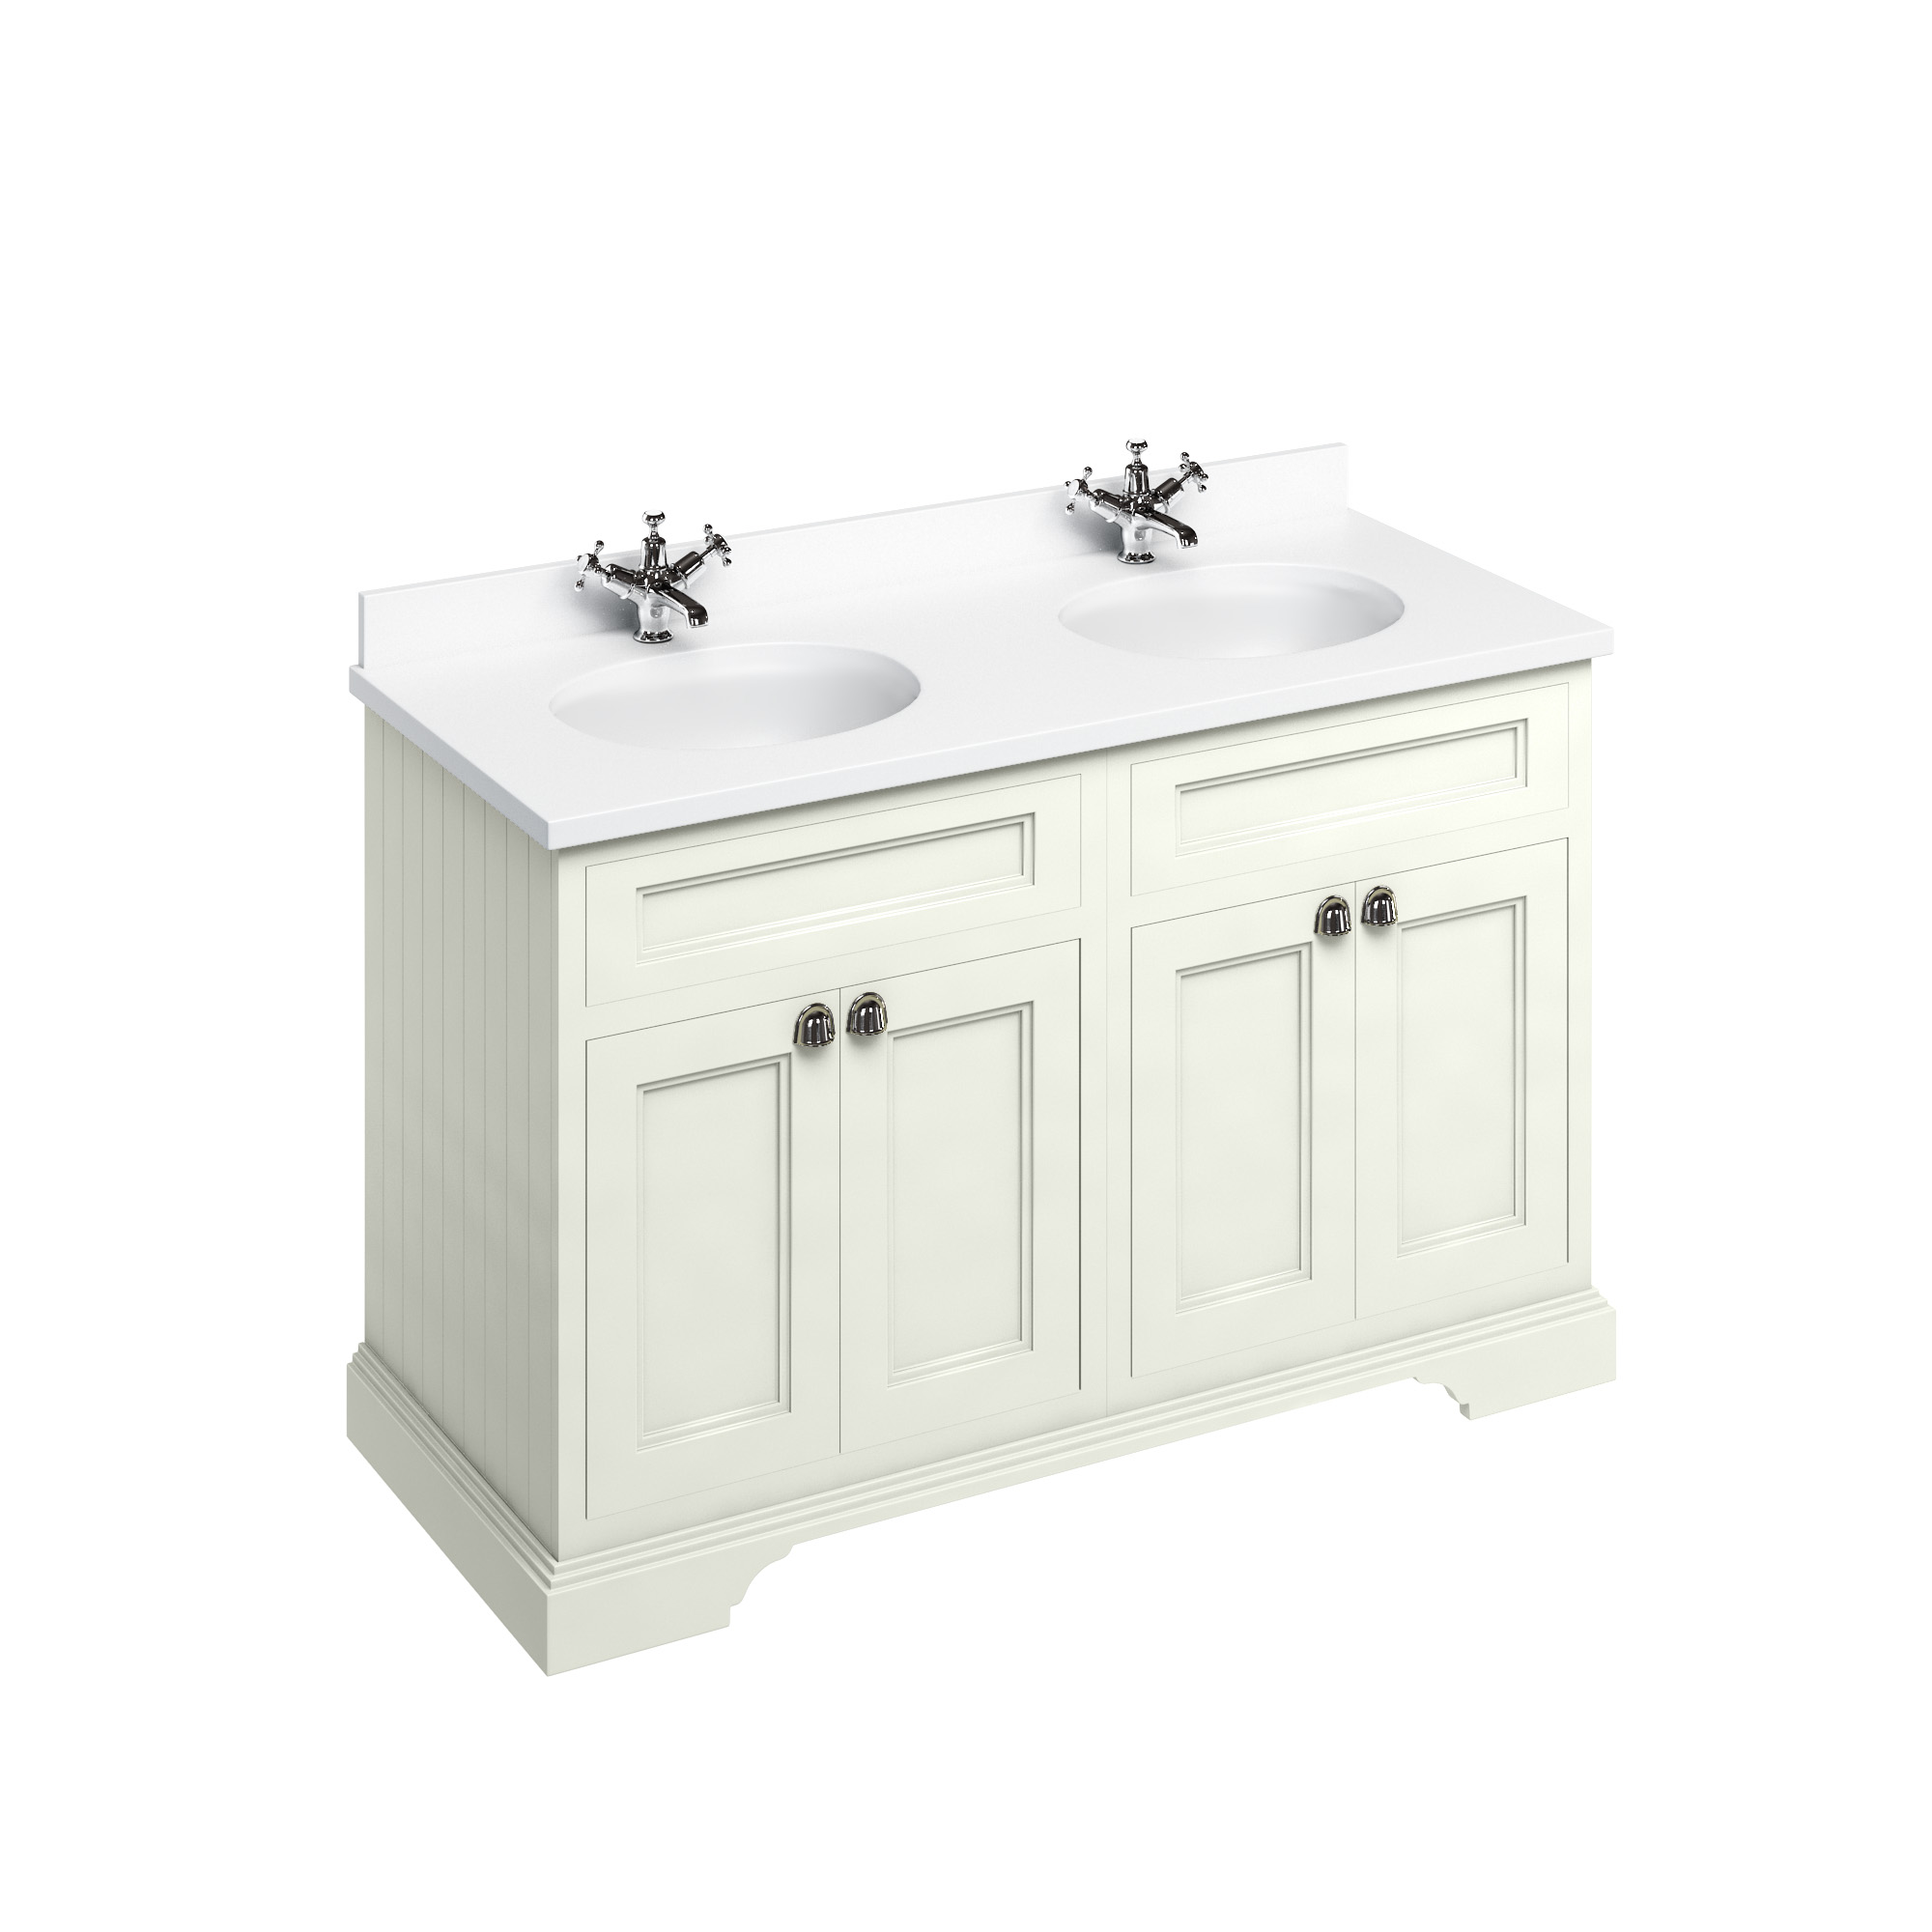 Freestanding 130 Vanity Unit with doors - Sand and Minerva white worktop with two integrated white basins